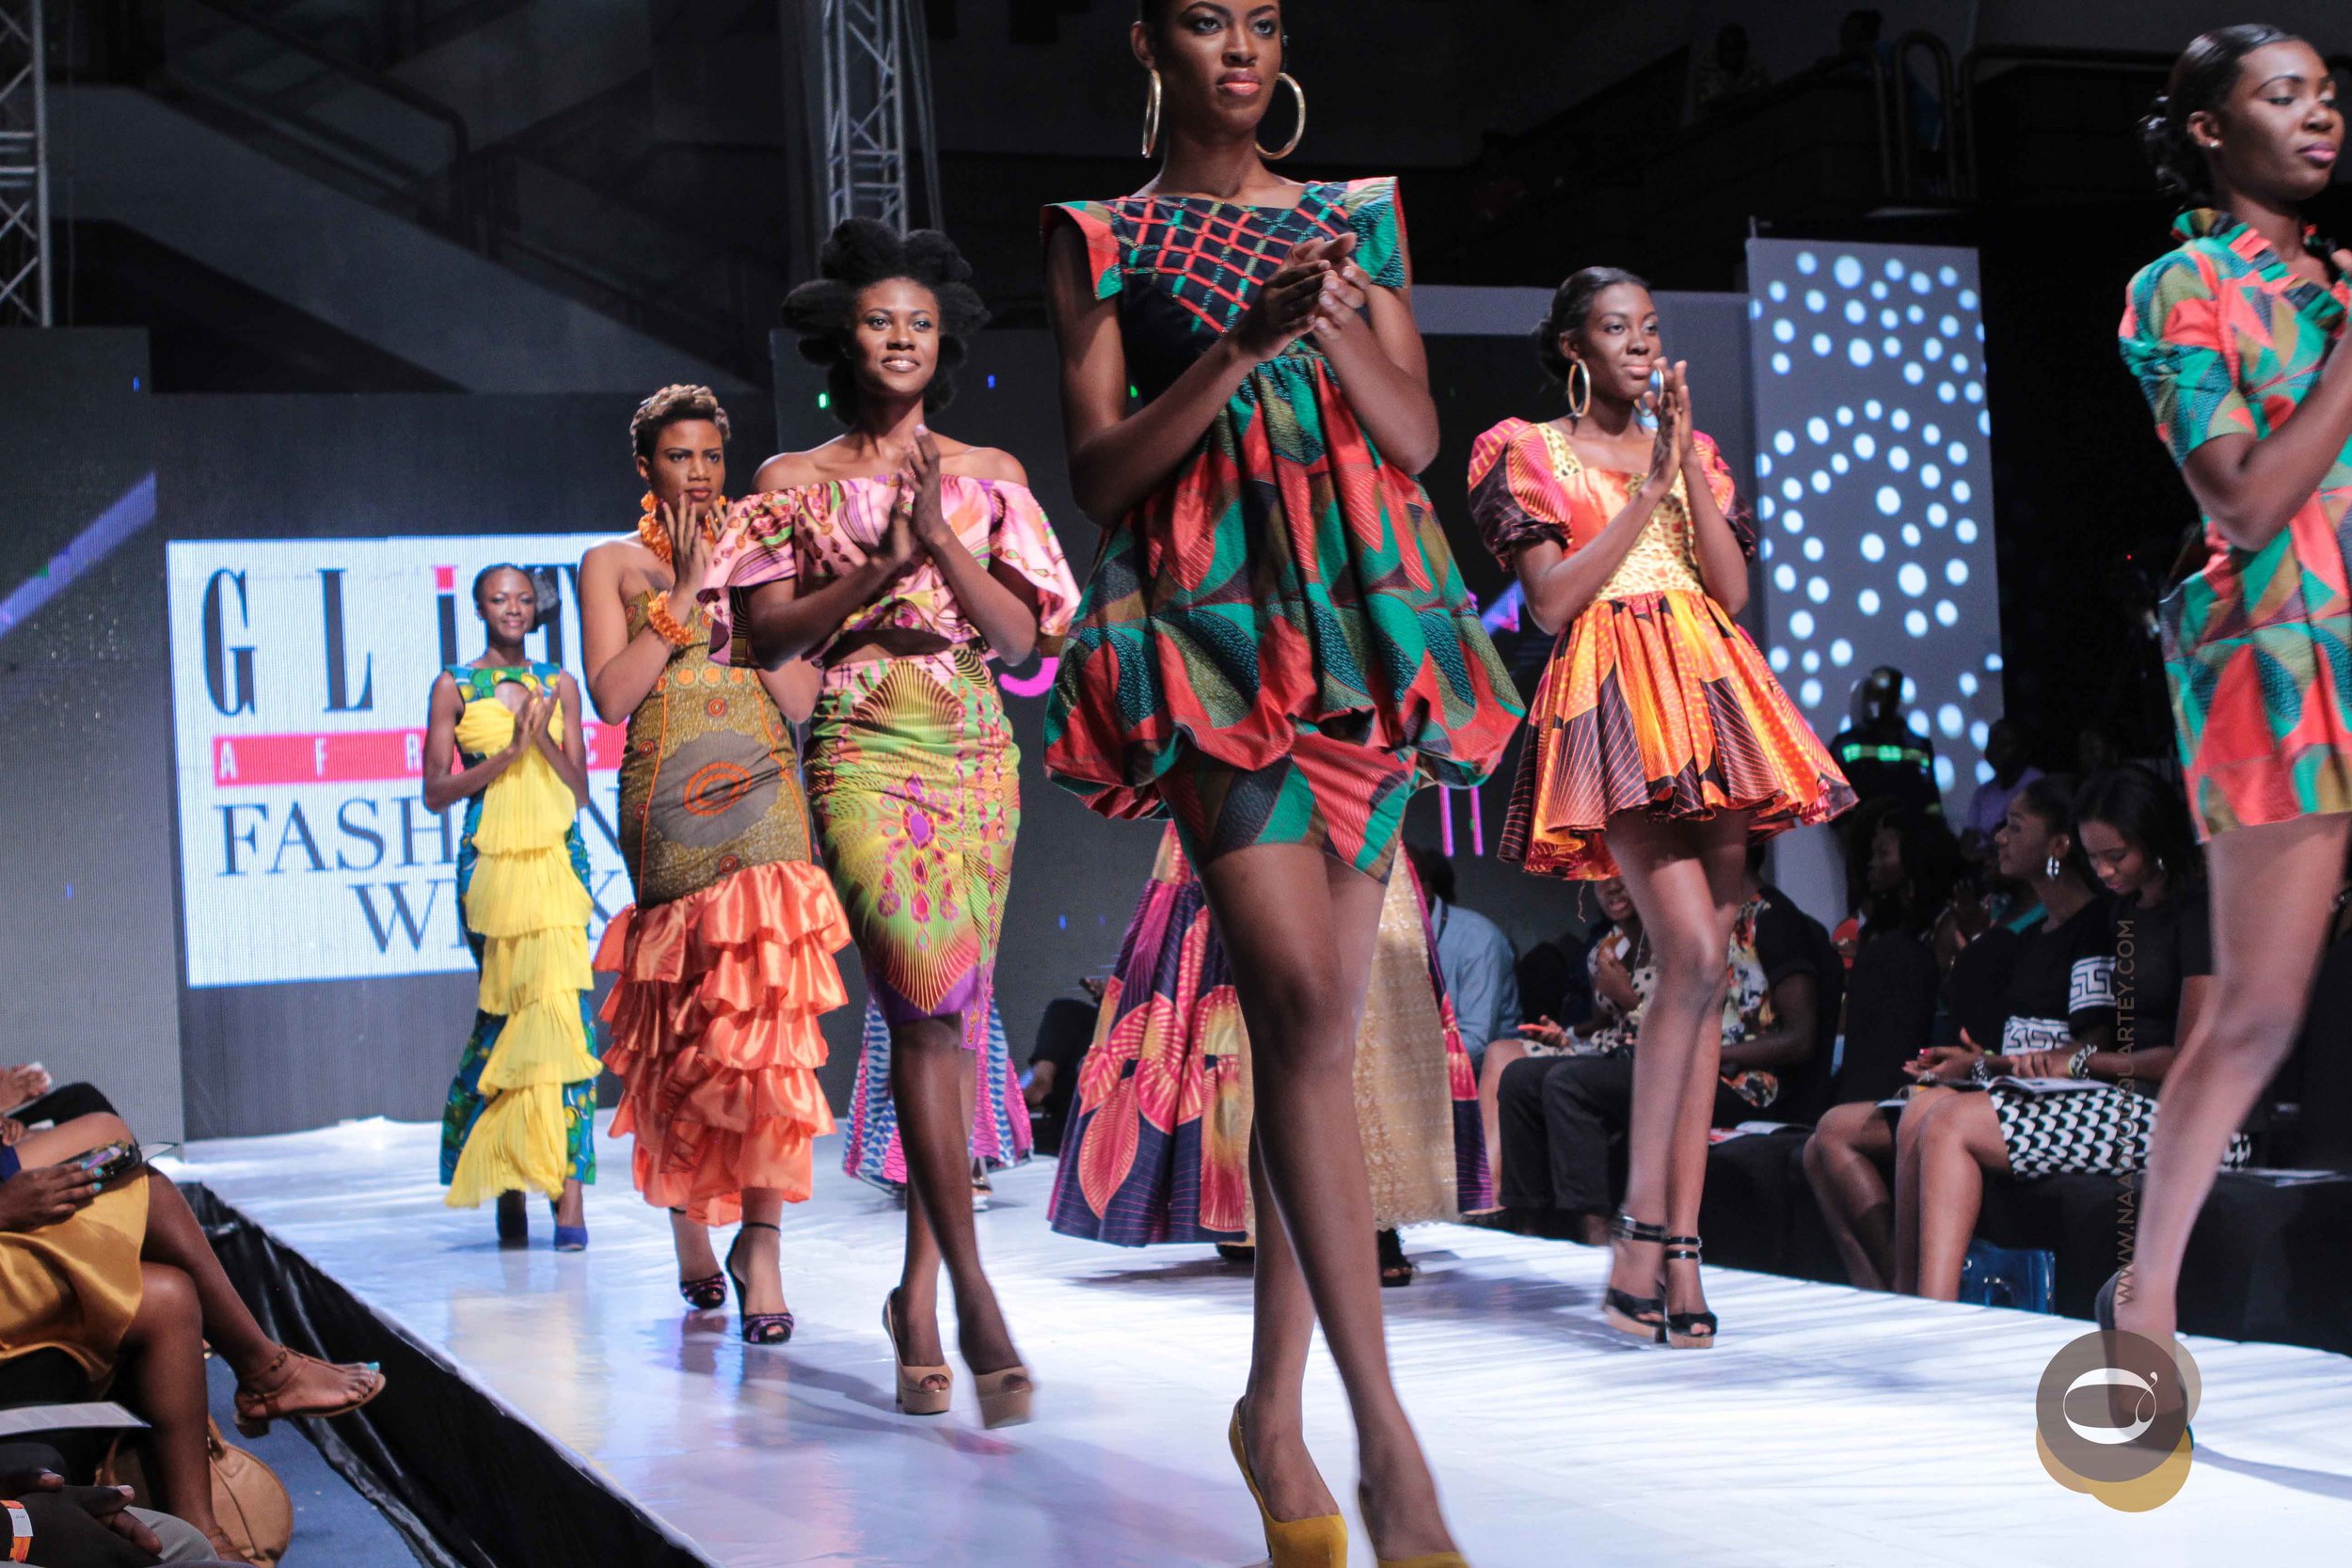 The Fashion Trends At Glitz African Fashion Week (Plus Reviews) — Naa ...